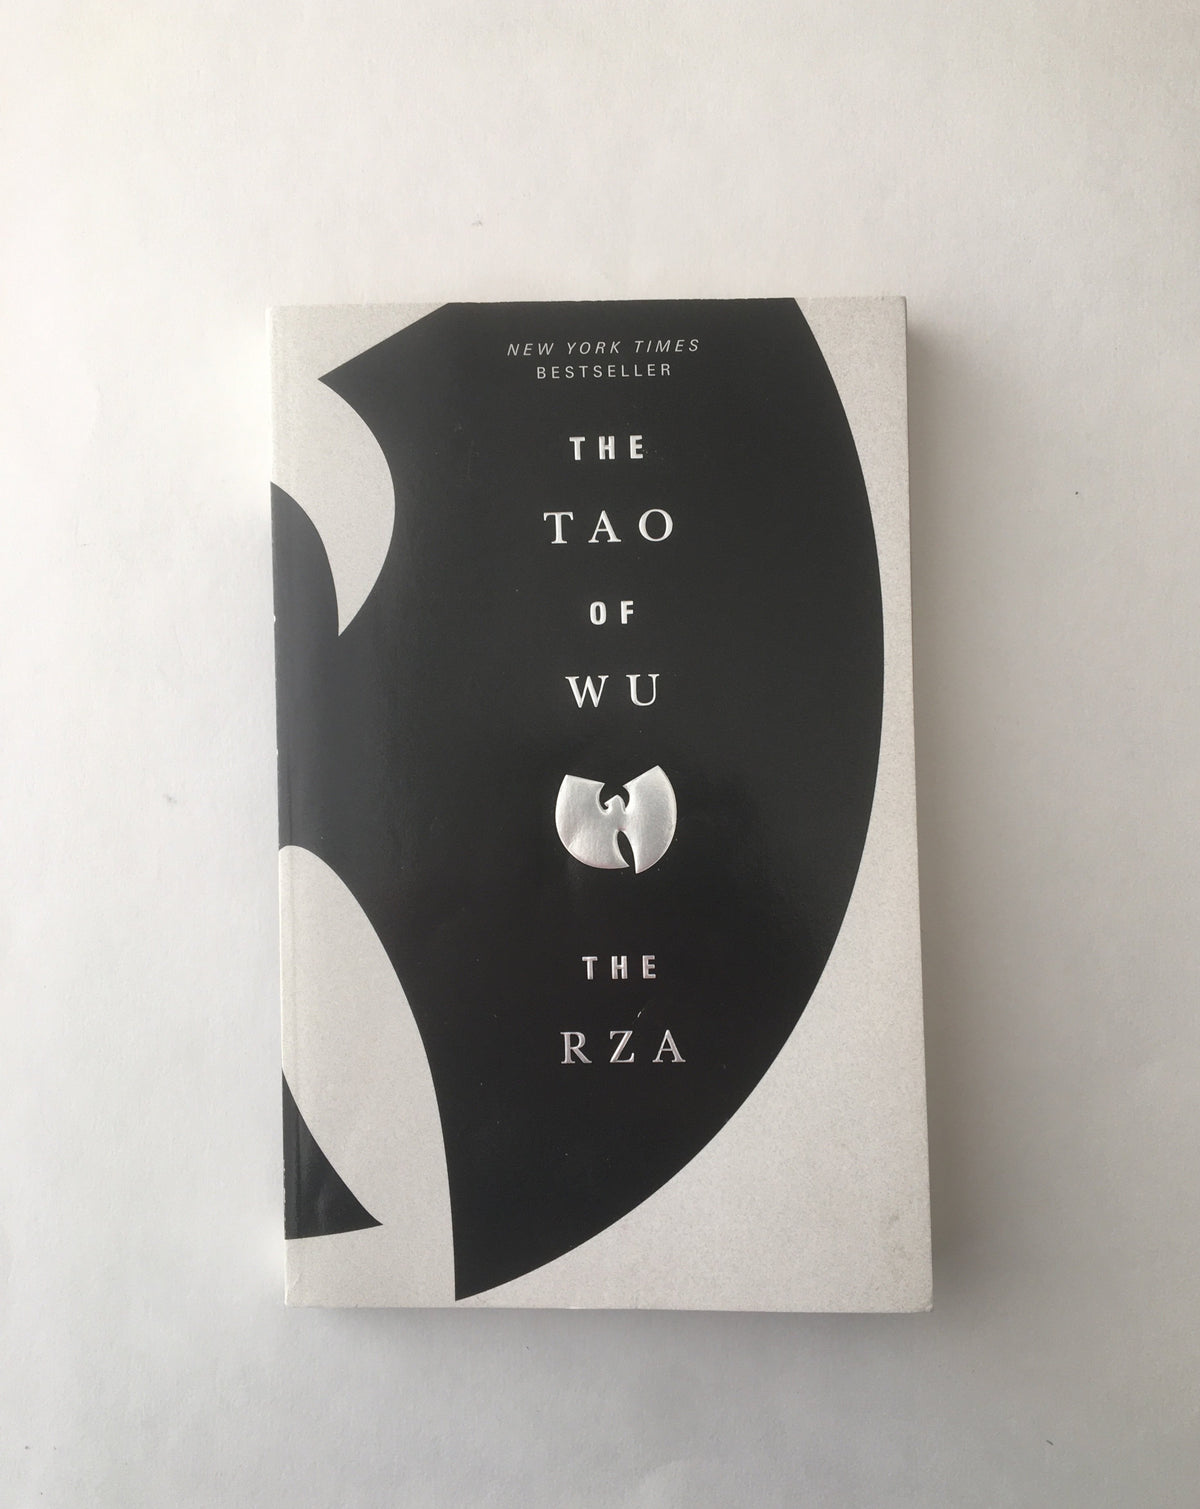 The Tao of WU by RZA